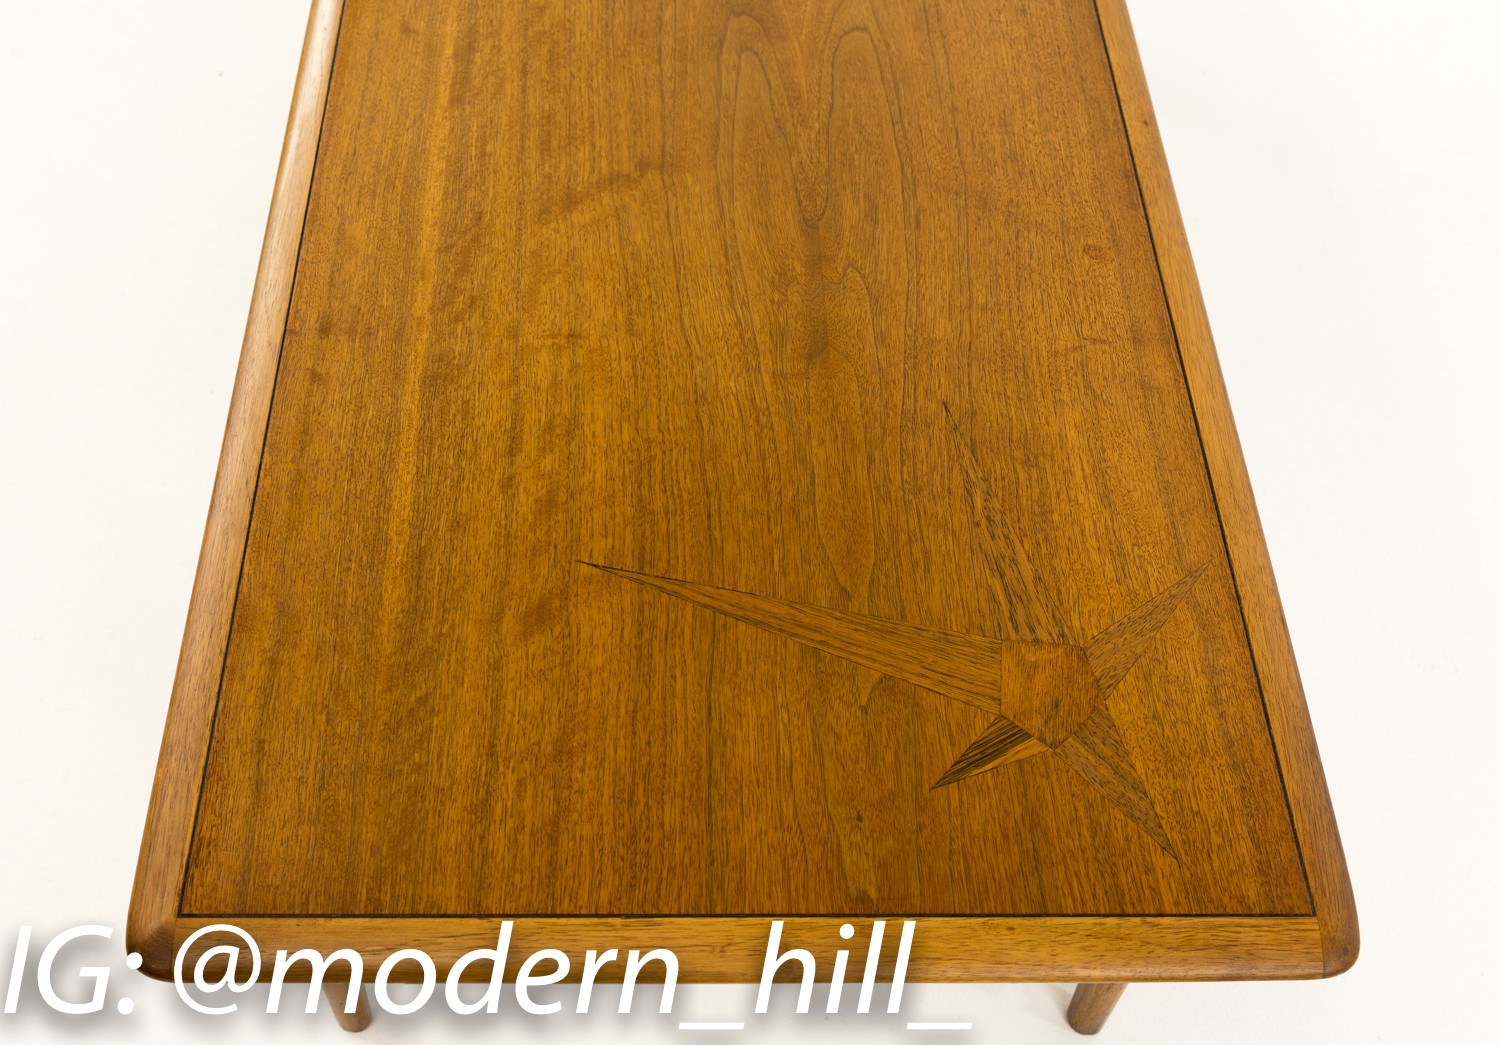 Lane Mid Century Coffee Table with Inlays